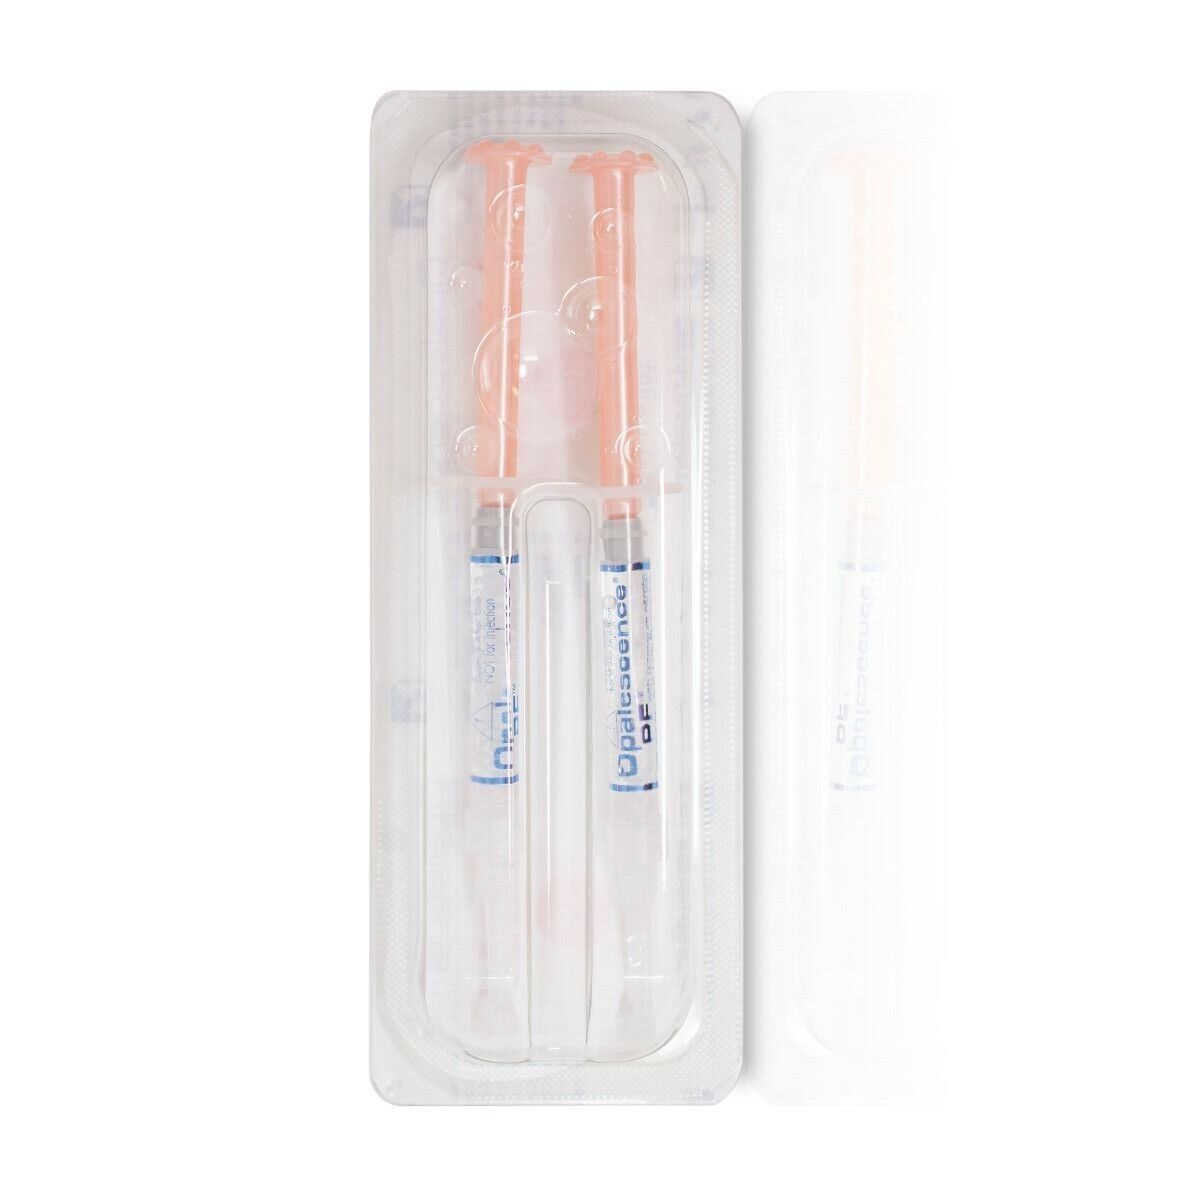 *1-Pack* Ultradent Opalescence PF 35% Tooth Whitening Refills Melon Flavor 5404 Opalescence 5404-U